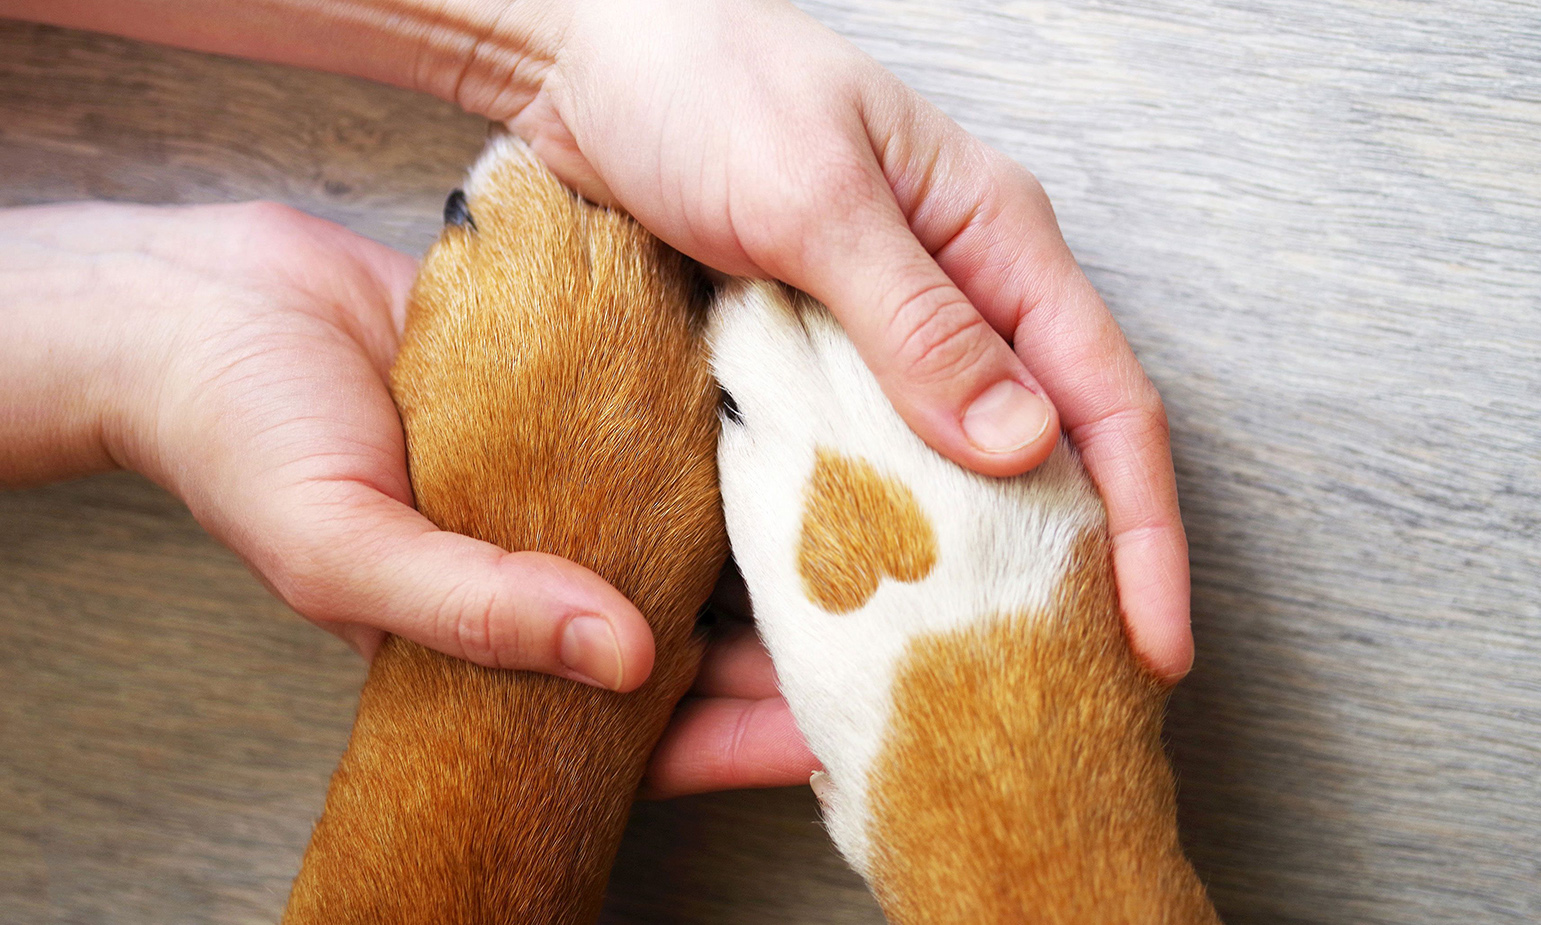 Human hands cradling pair of large, mostly-tan-colored dog paws, one paw with heart-shaped gap in white patch